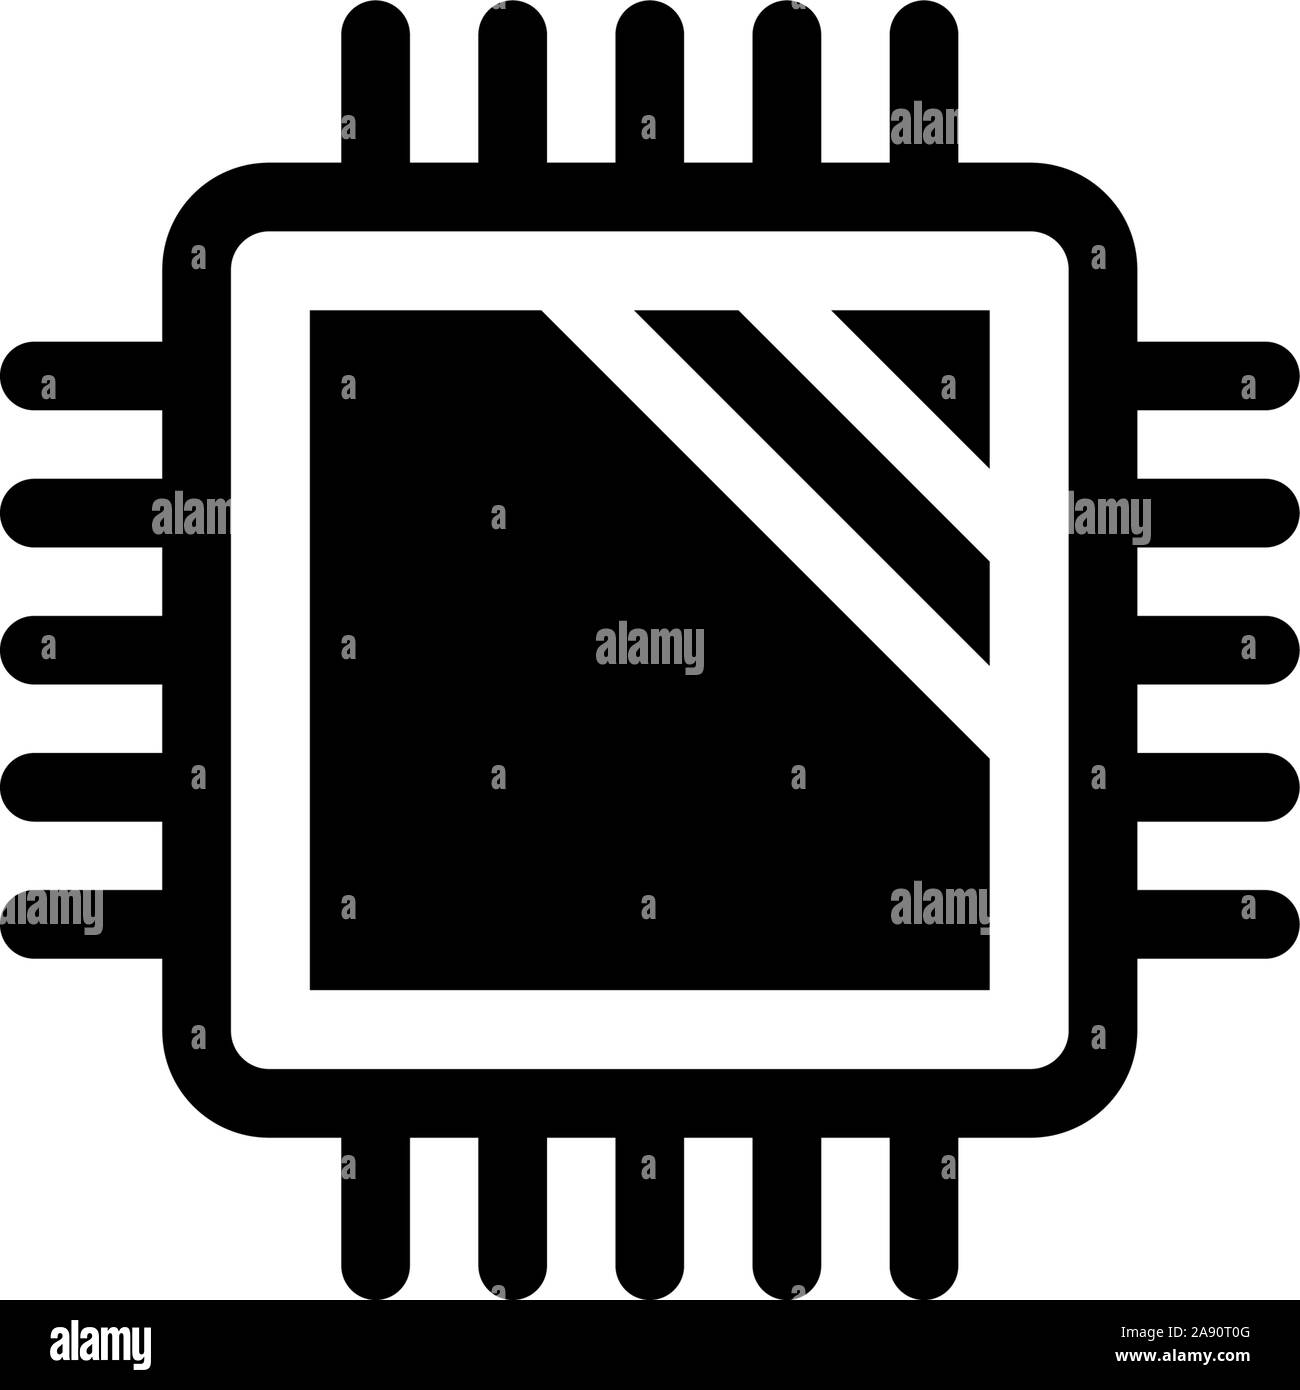 Central Computer Processors, CPU Microchip. Flat Vector Icon illustration. Simple black symbol on white background. Central Computer Processors, CPU s Stock Vector